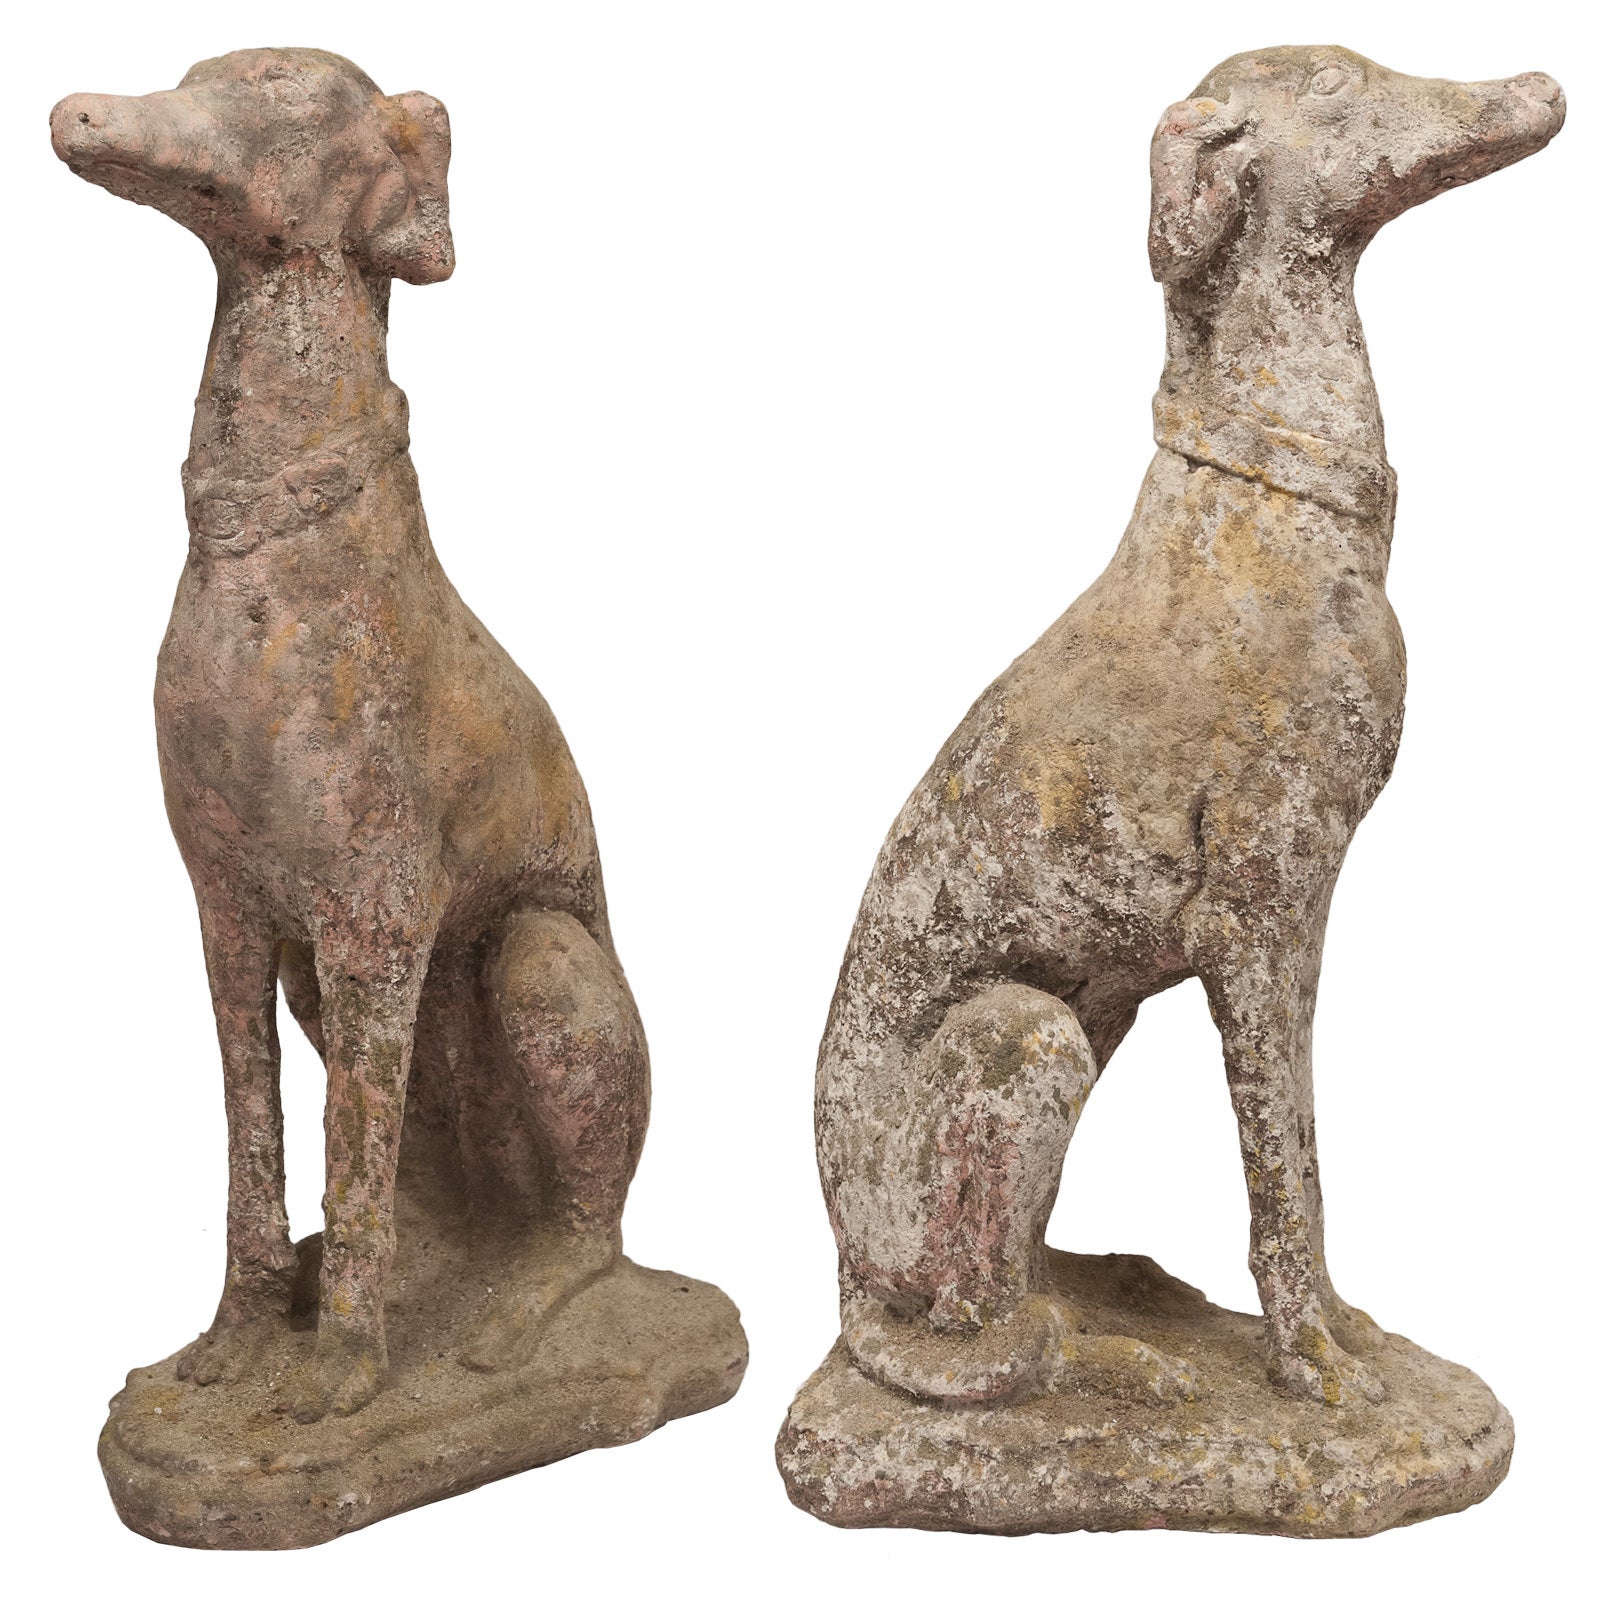 Pair of Vintage Stone Greyhounds